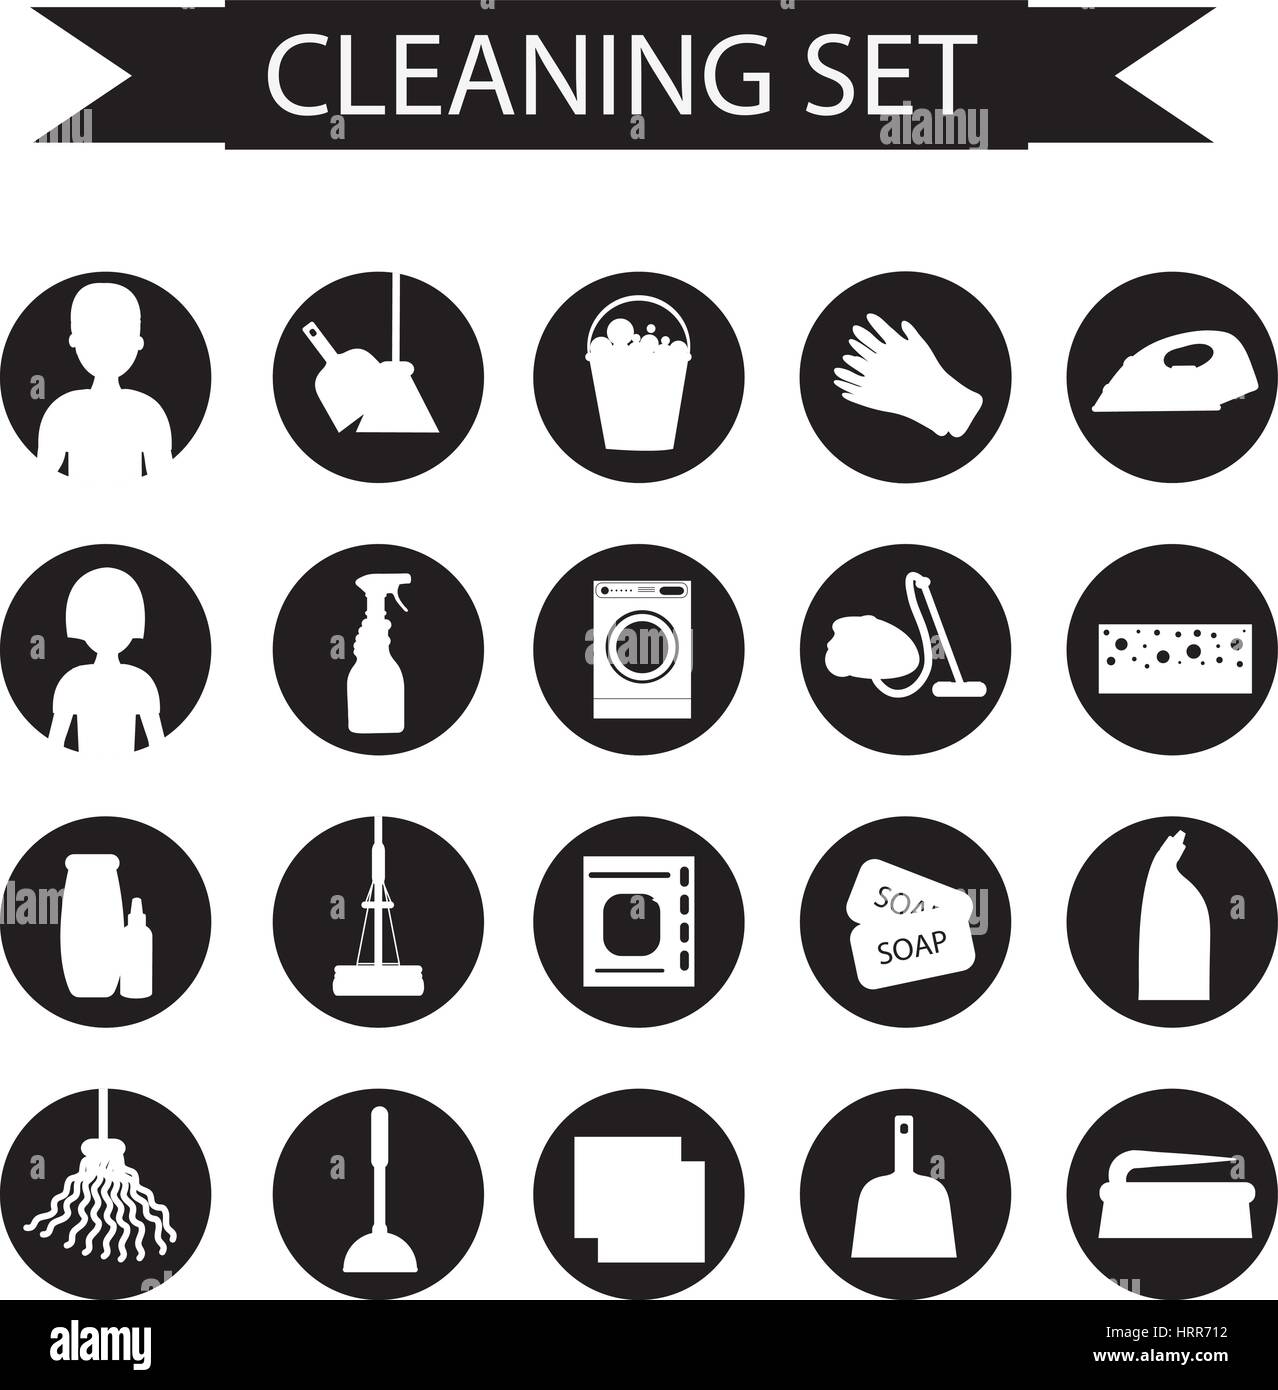 https://c8.alamy.com/comp/HRR712/set-of-icons-for-cleaning-tools-house-cleaning-cleaning-supplies-flat-HRR712.jpg